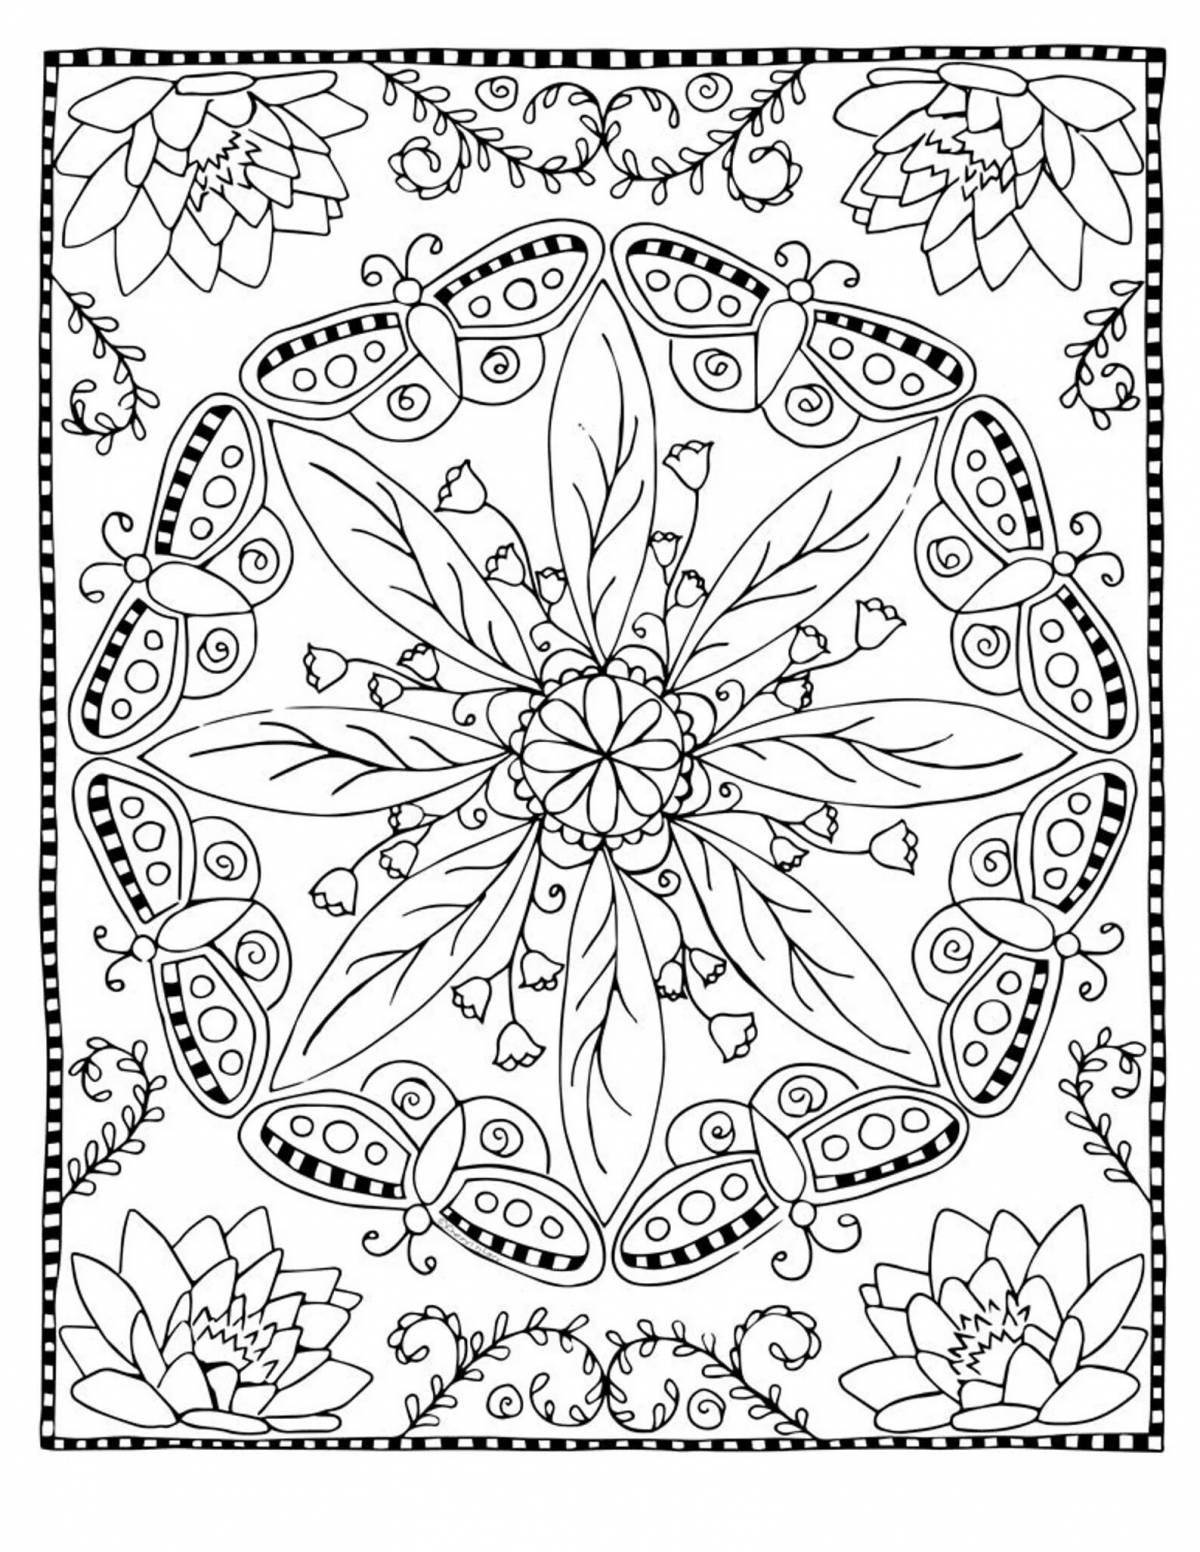 Colorful pavlovian scarf coloring book for kids